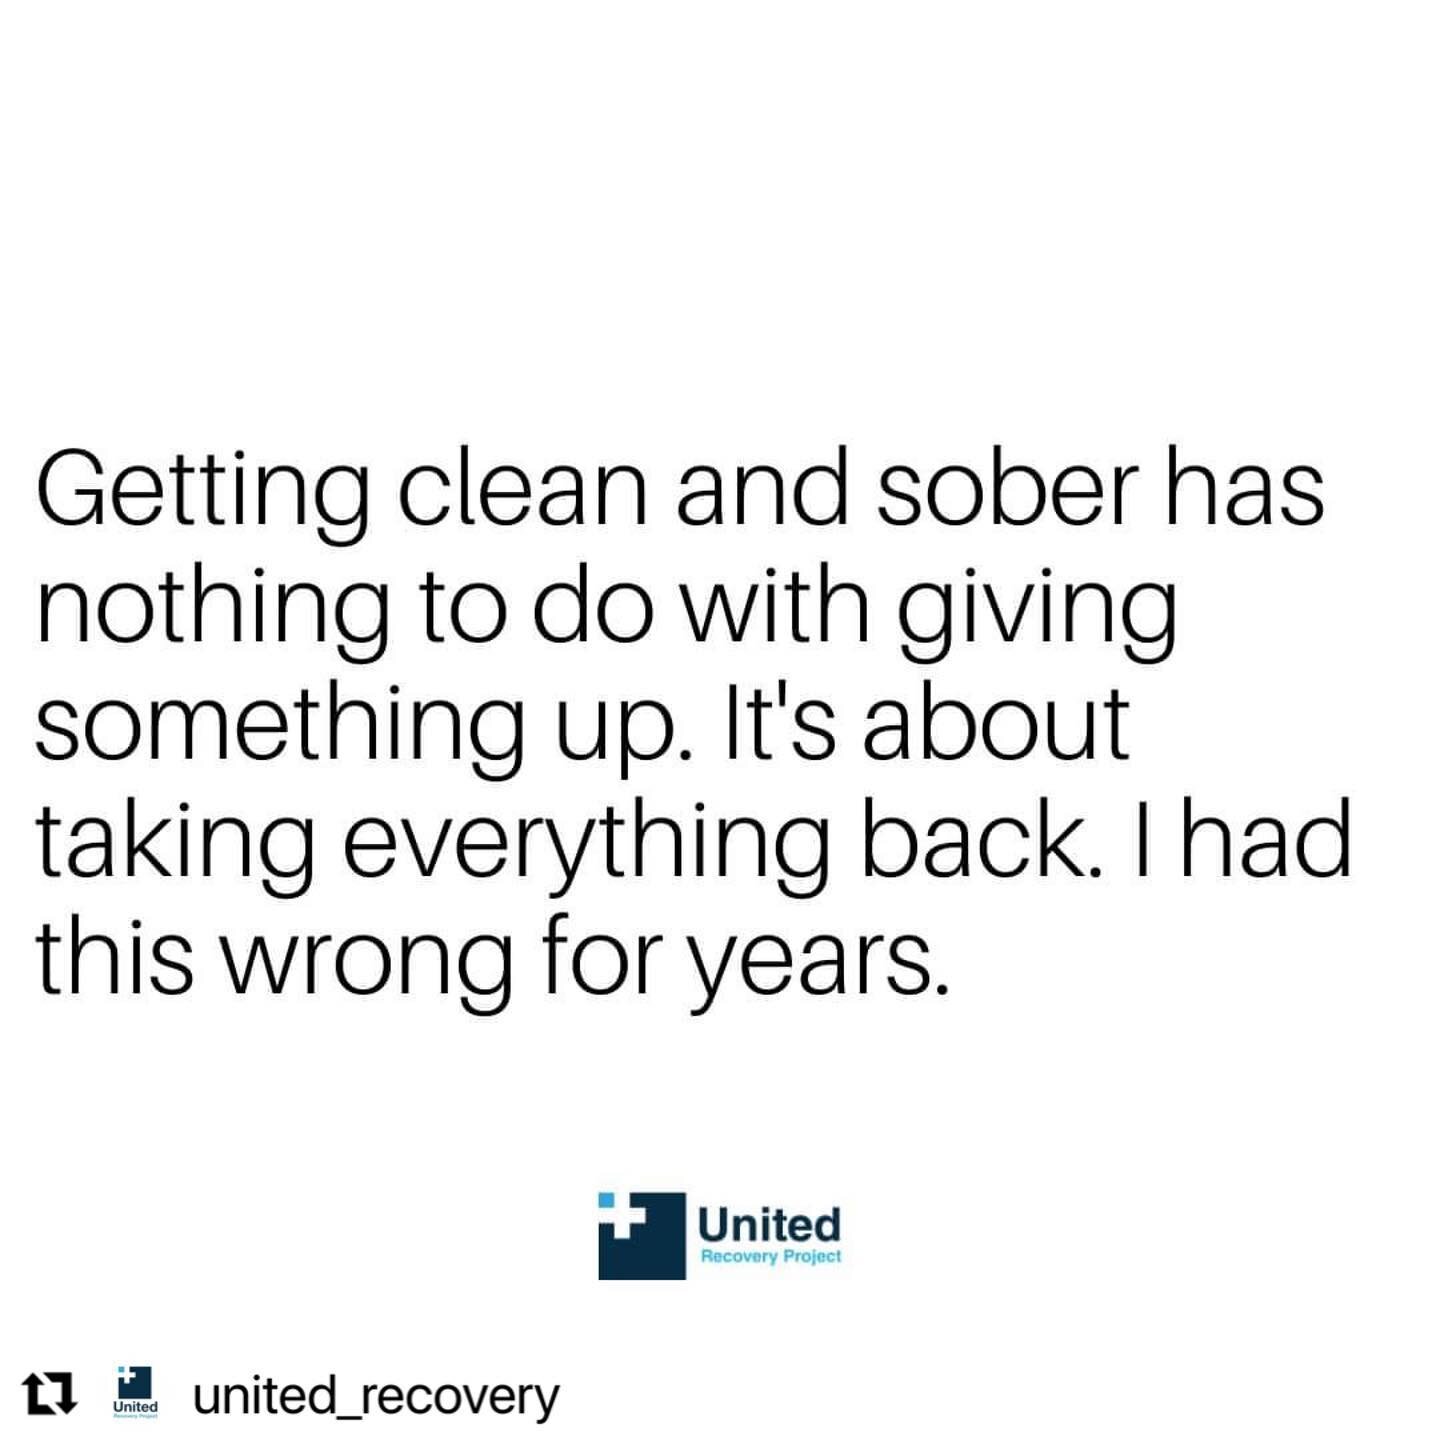 #Repost @united_recovery with @use.repost
・・・
What did you take back?

 #sober #sobriety #addiction #recovery #reelinginserenity #odaat #flyfishing #onthewater #ris #sober #clean #wedorecover #flyfishingsaveslives